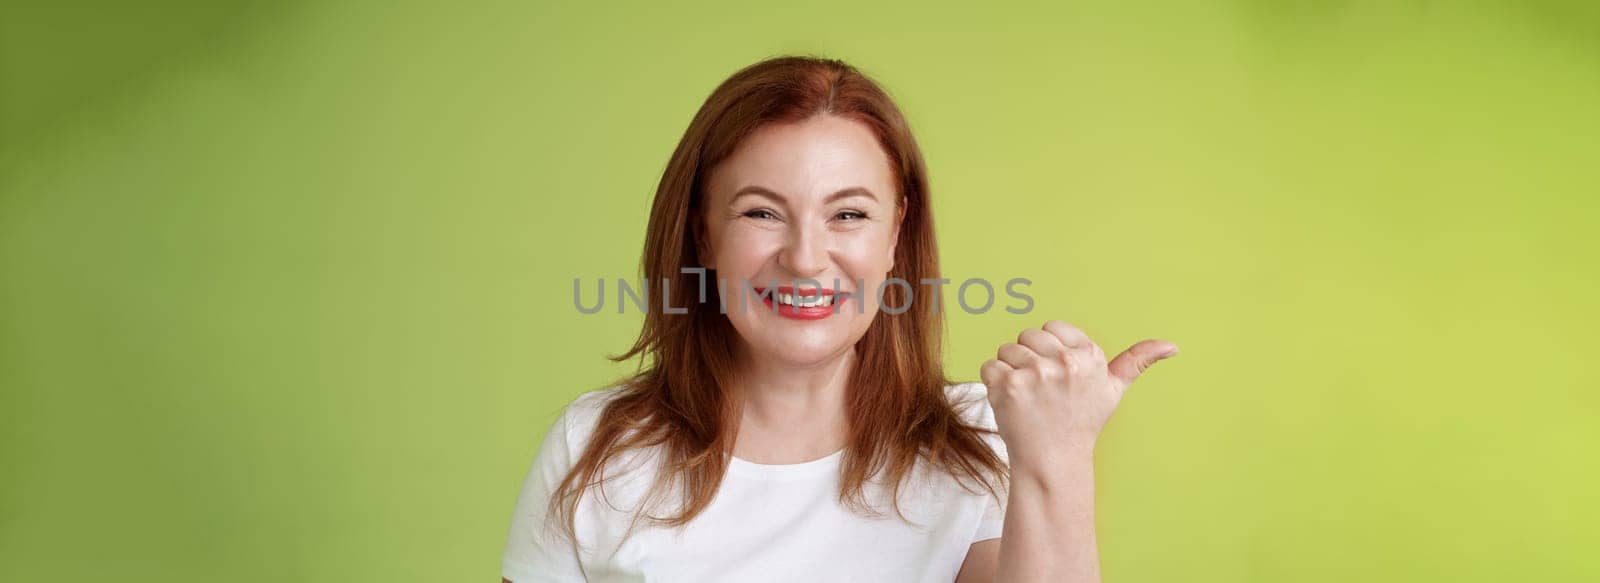 Come visit our store. Cheerful pleasant friendly charming redhead middle-aged woman entrepreneur inviting check-out promo smiling happily sincere kind grin pointing left thumb stand green background.